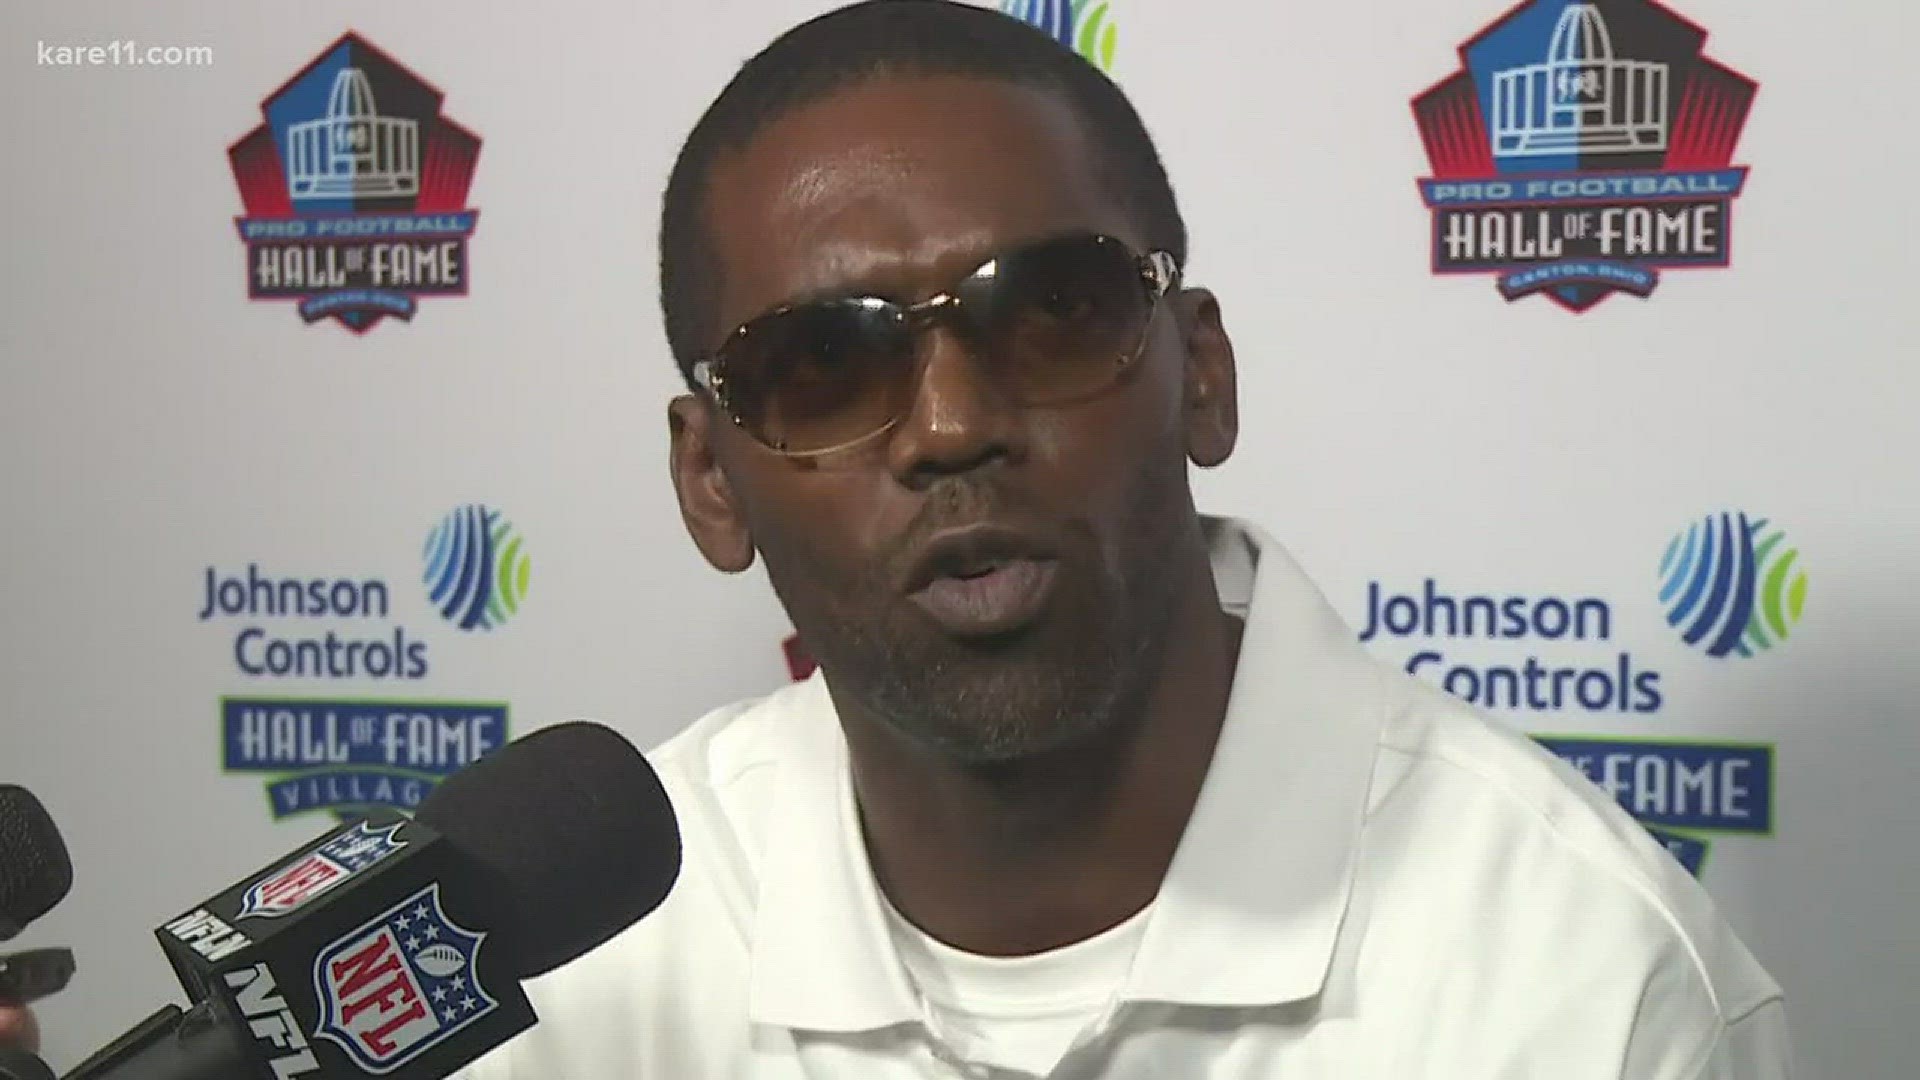 Randy Moss reflects on Chaoch Green ahead of Moss' Hall of Fame induction ceremony.